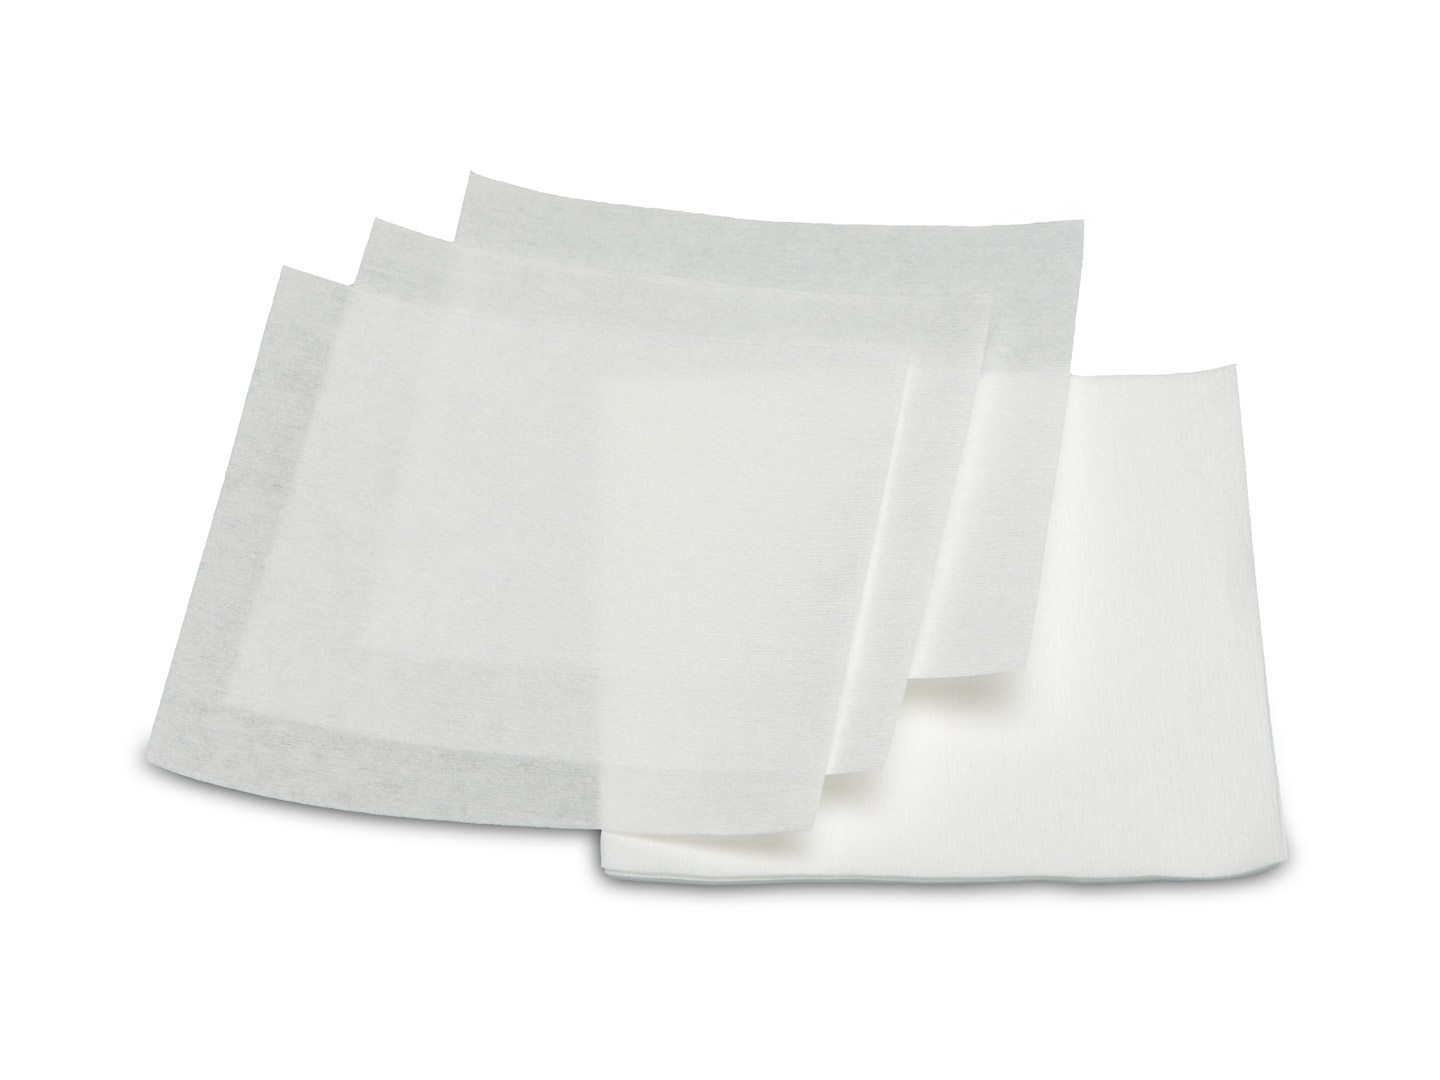 High-Tech Conversions Lint-Free Nonwoven Cleanroom Wipes - Cole-Parmer